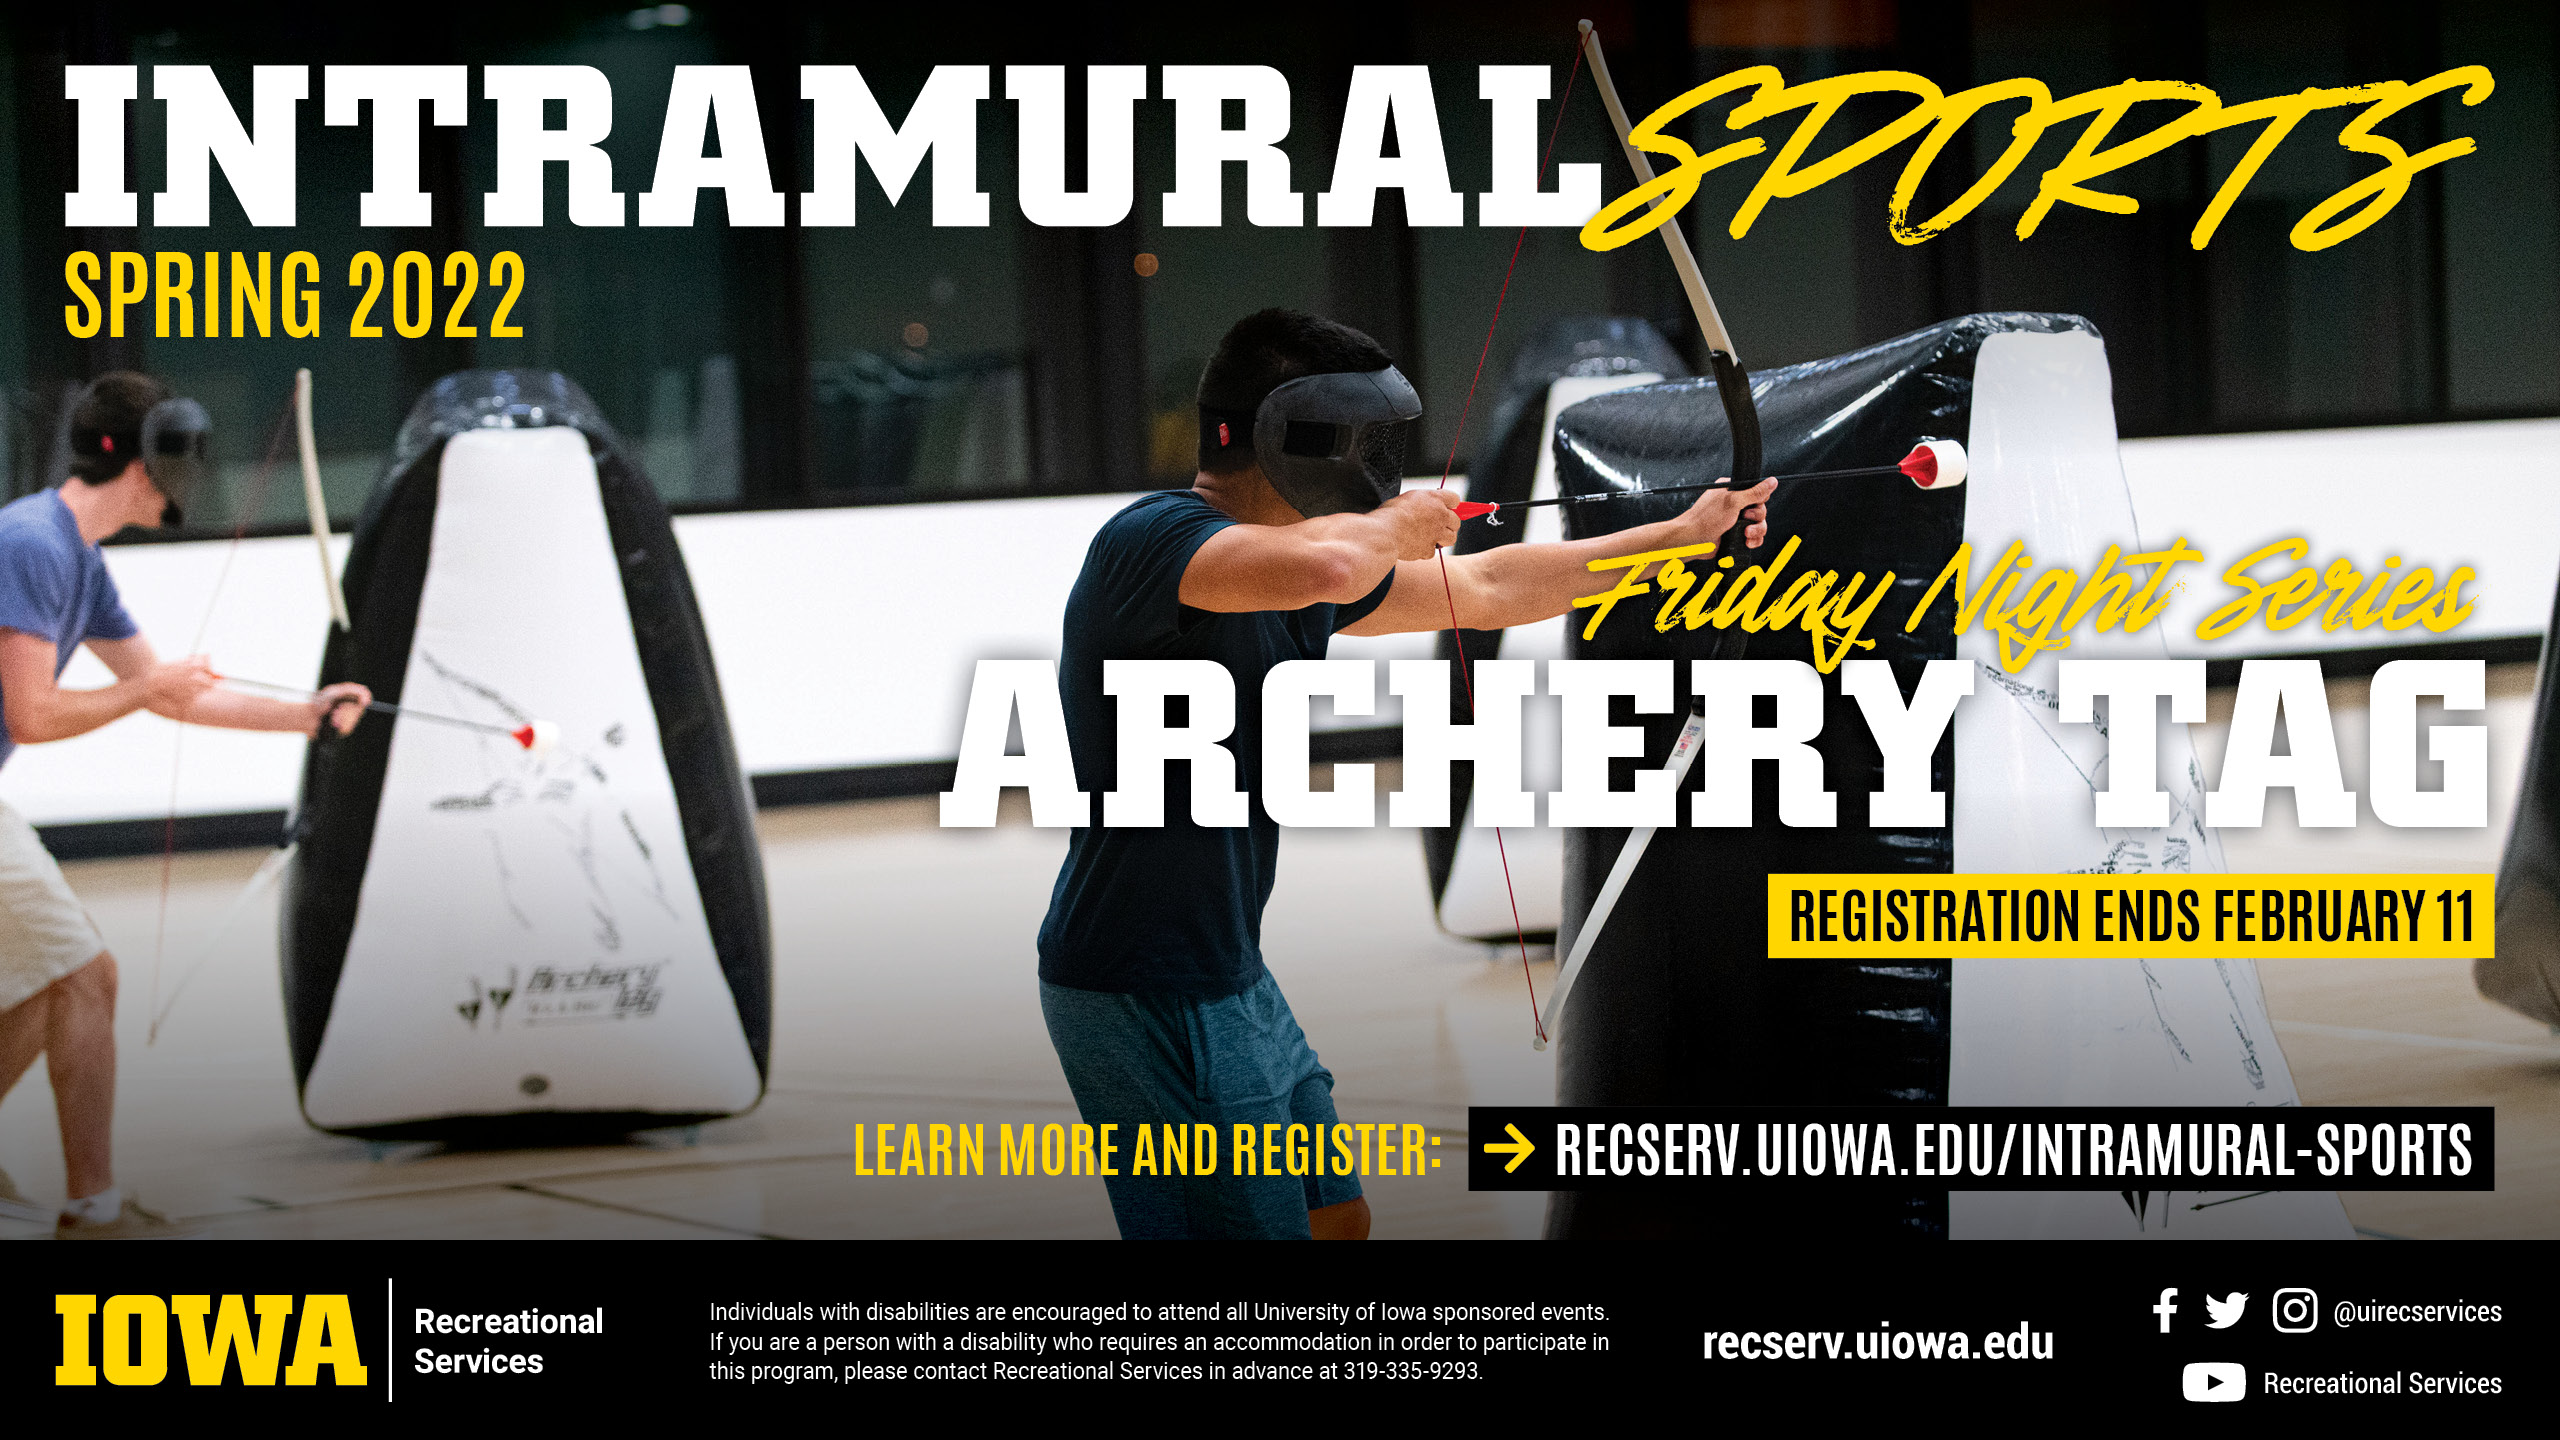 Intramural Sports Spring 2022 Friday Night Series Archery Tag Registration ends February 11 learn more and register at: recserv.uiowa.edu/intramural-sports